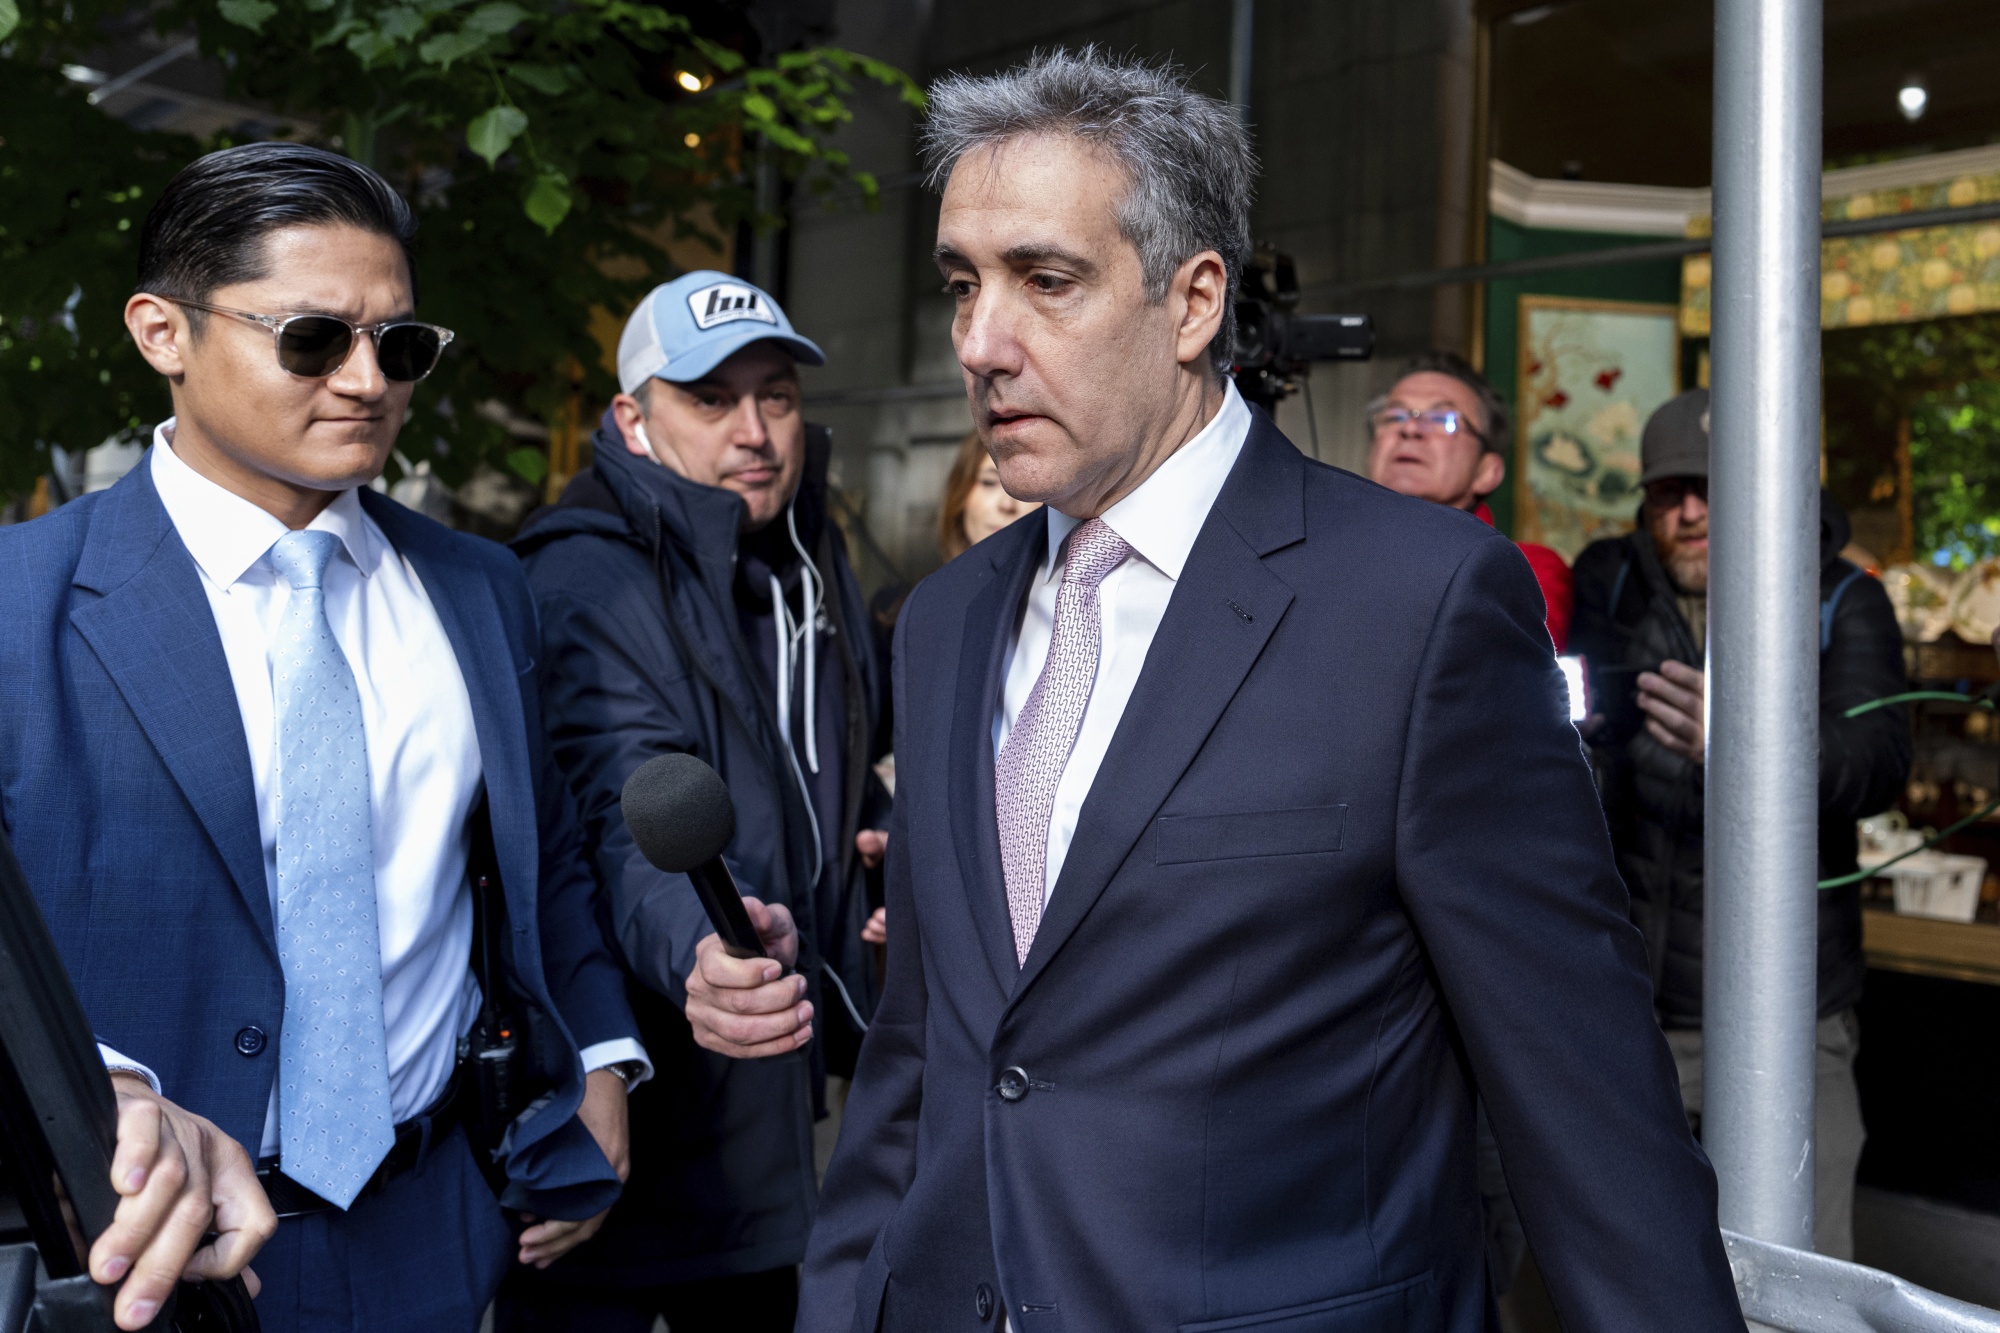 Michael Cohen leaves his apartment building on his way to Manhattan criminal court, on May 13.